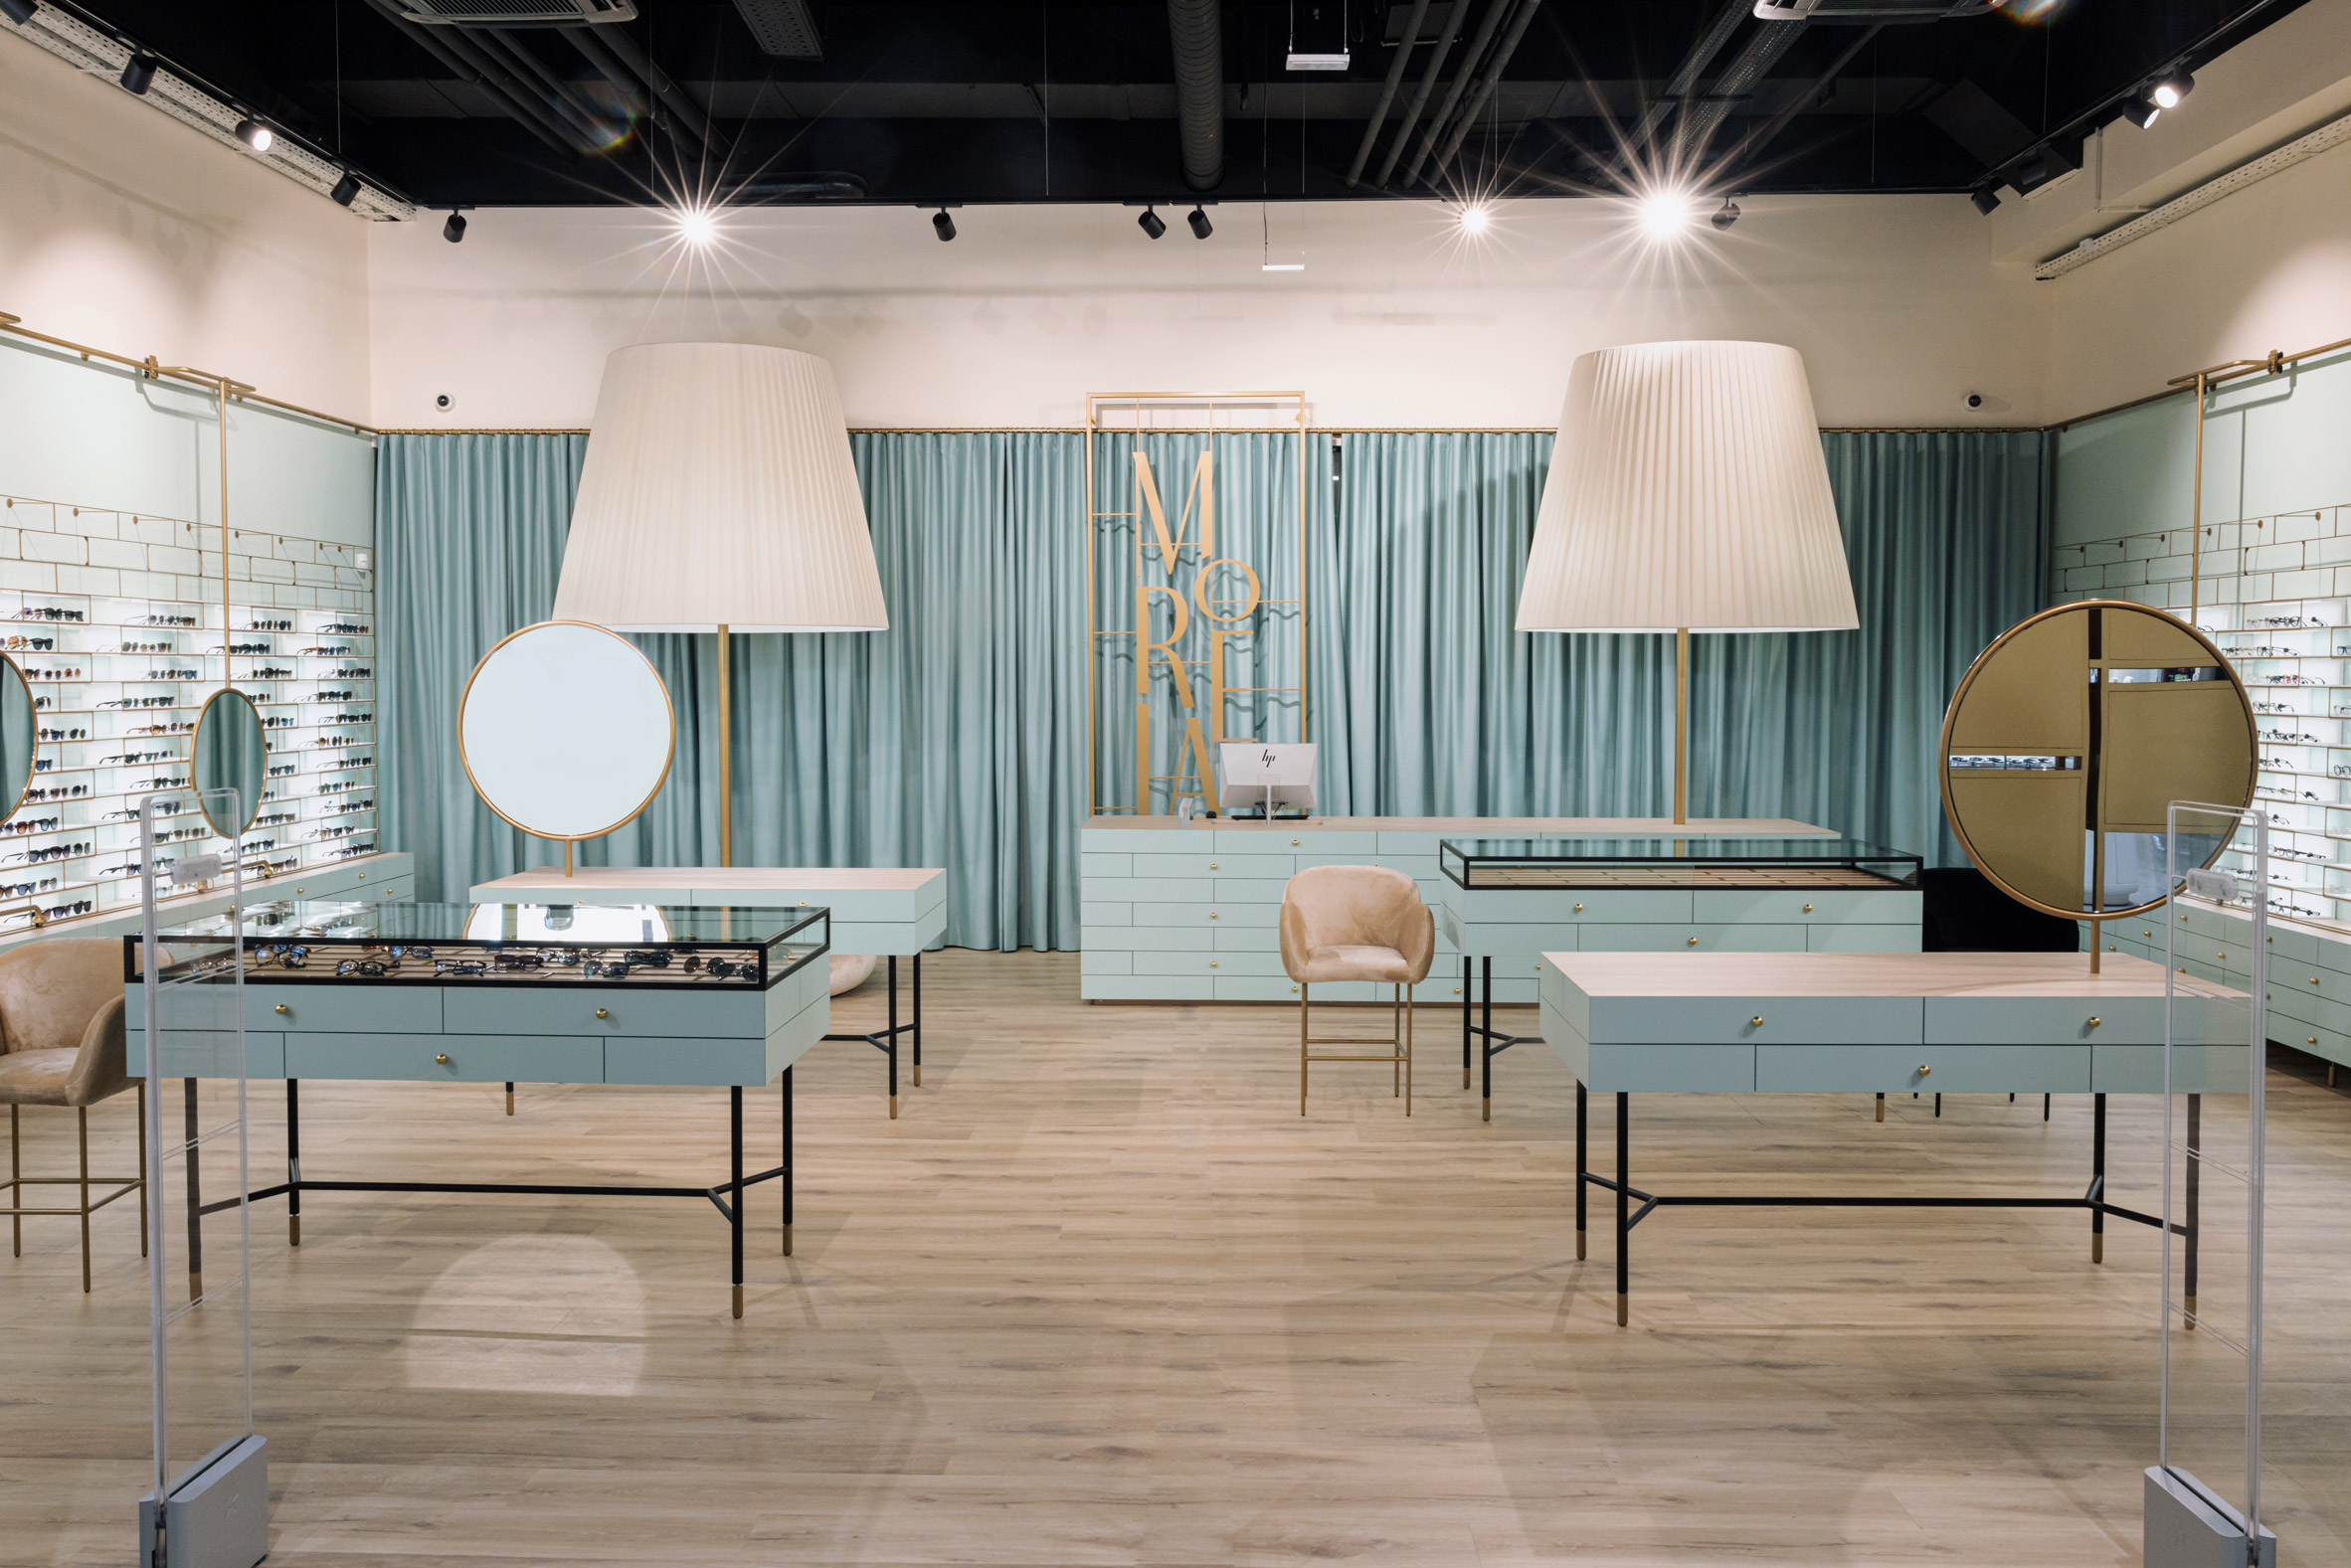 Overview of Morela eyewear store with two oversized lamps and powder-blue storage